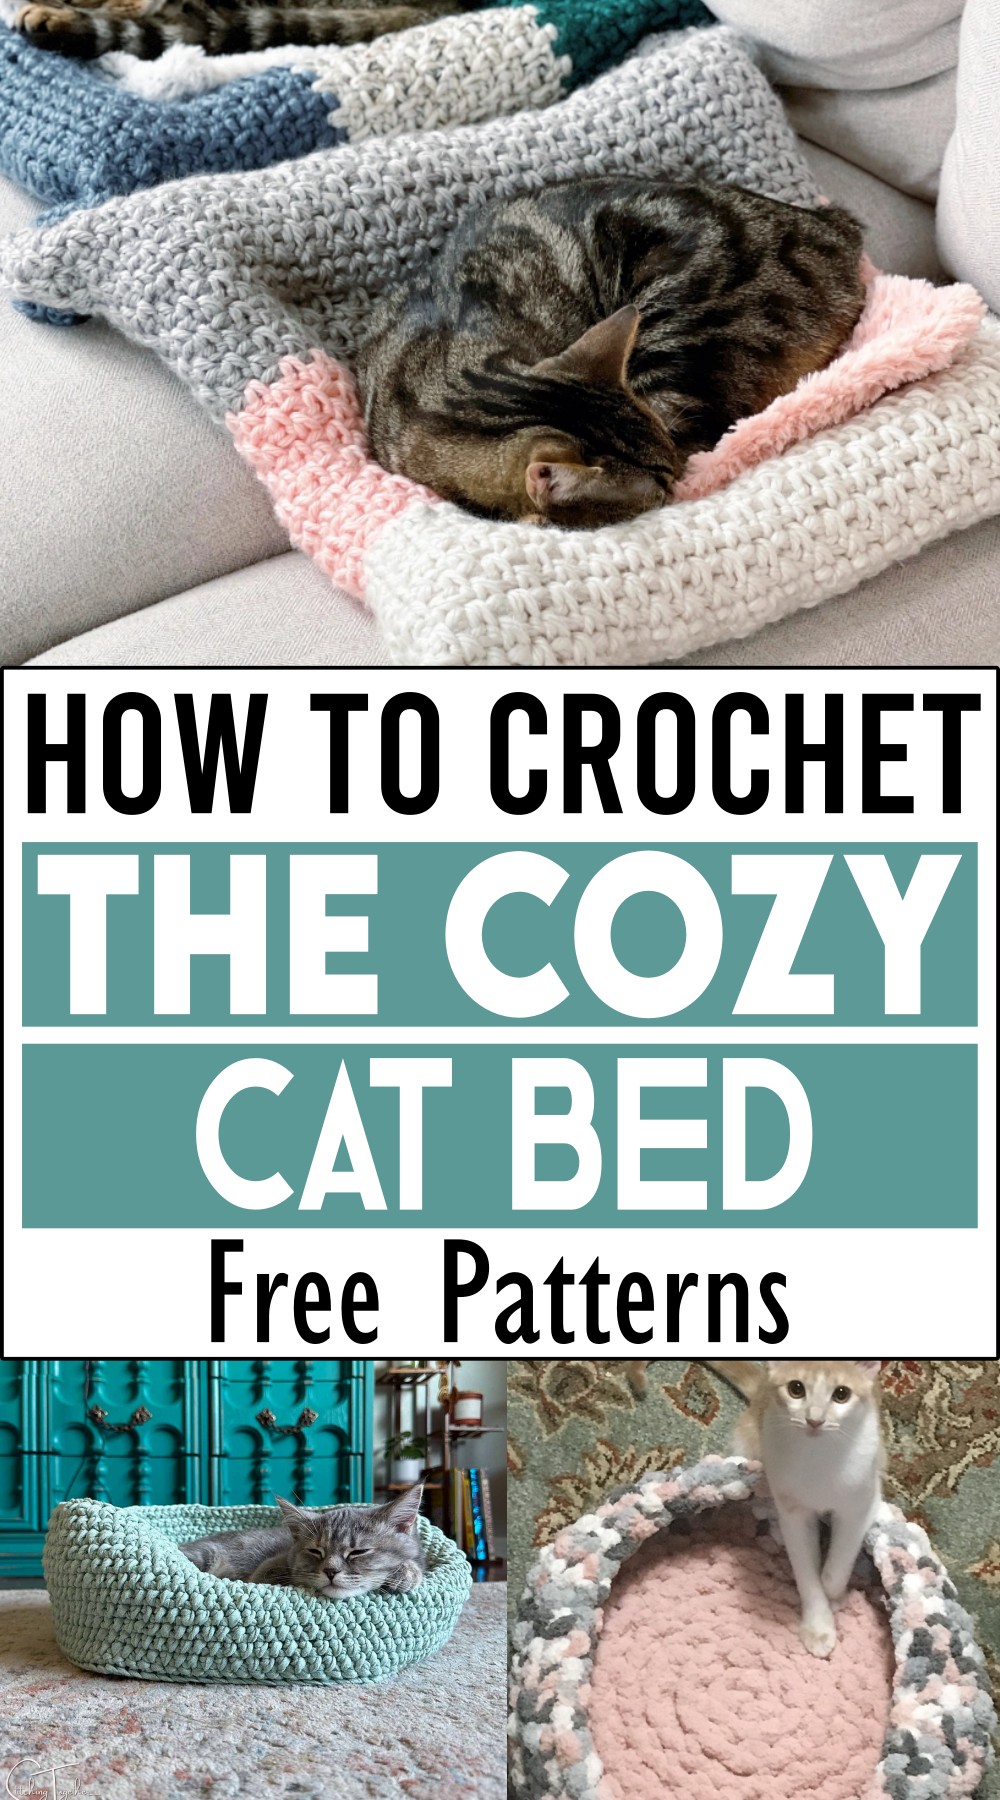 How to Crochet The Cozy Cat Bed